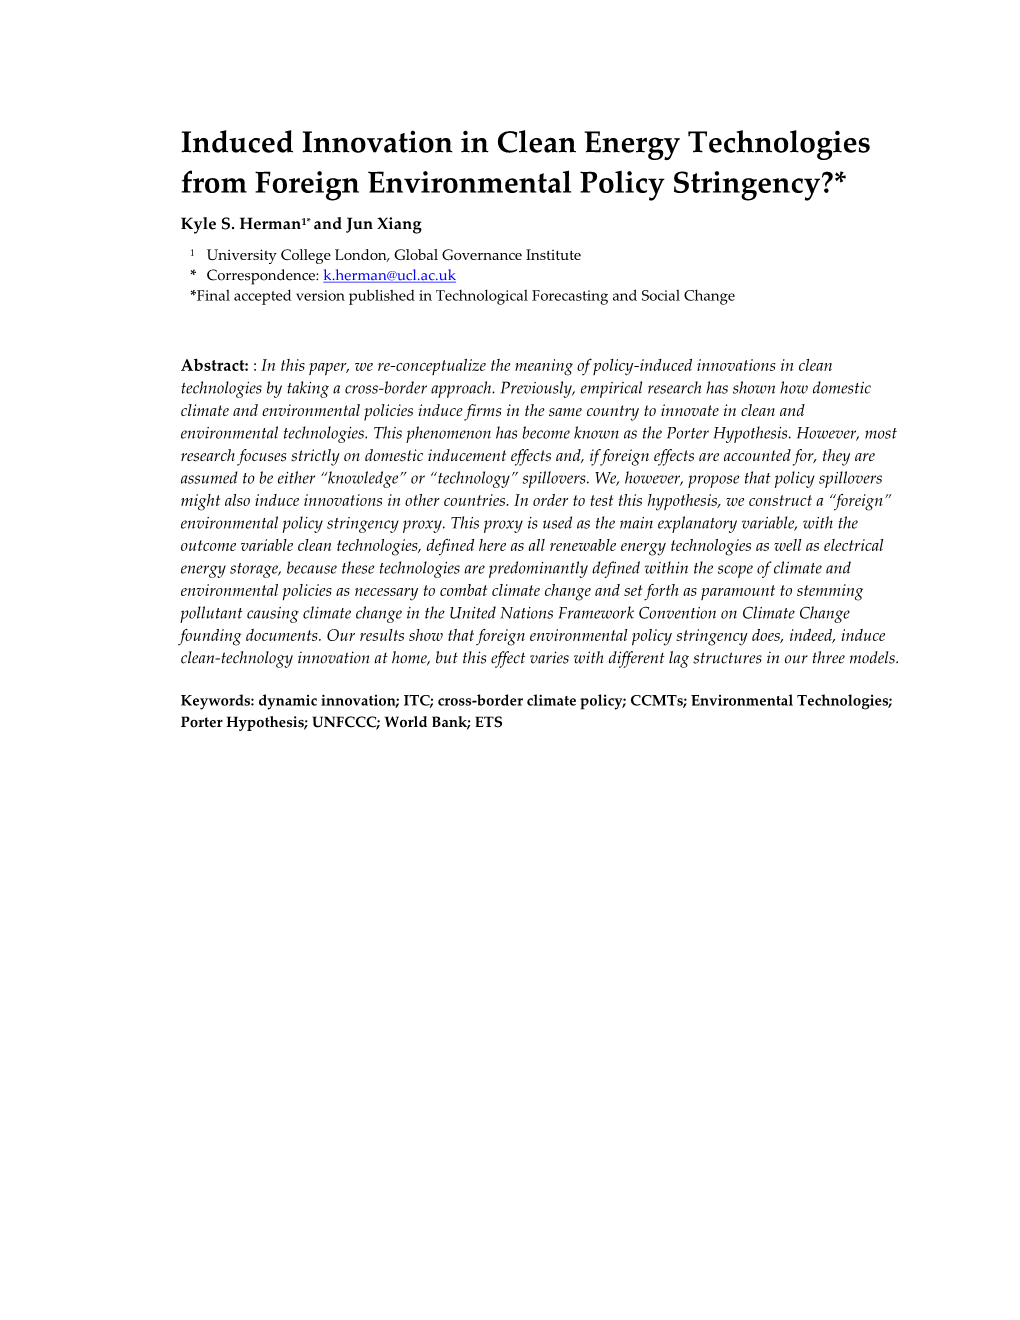 Induced Innovation in Clean Energy Technologies from Foreign Environmental Policy Stringency?*